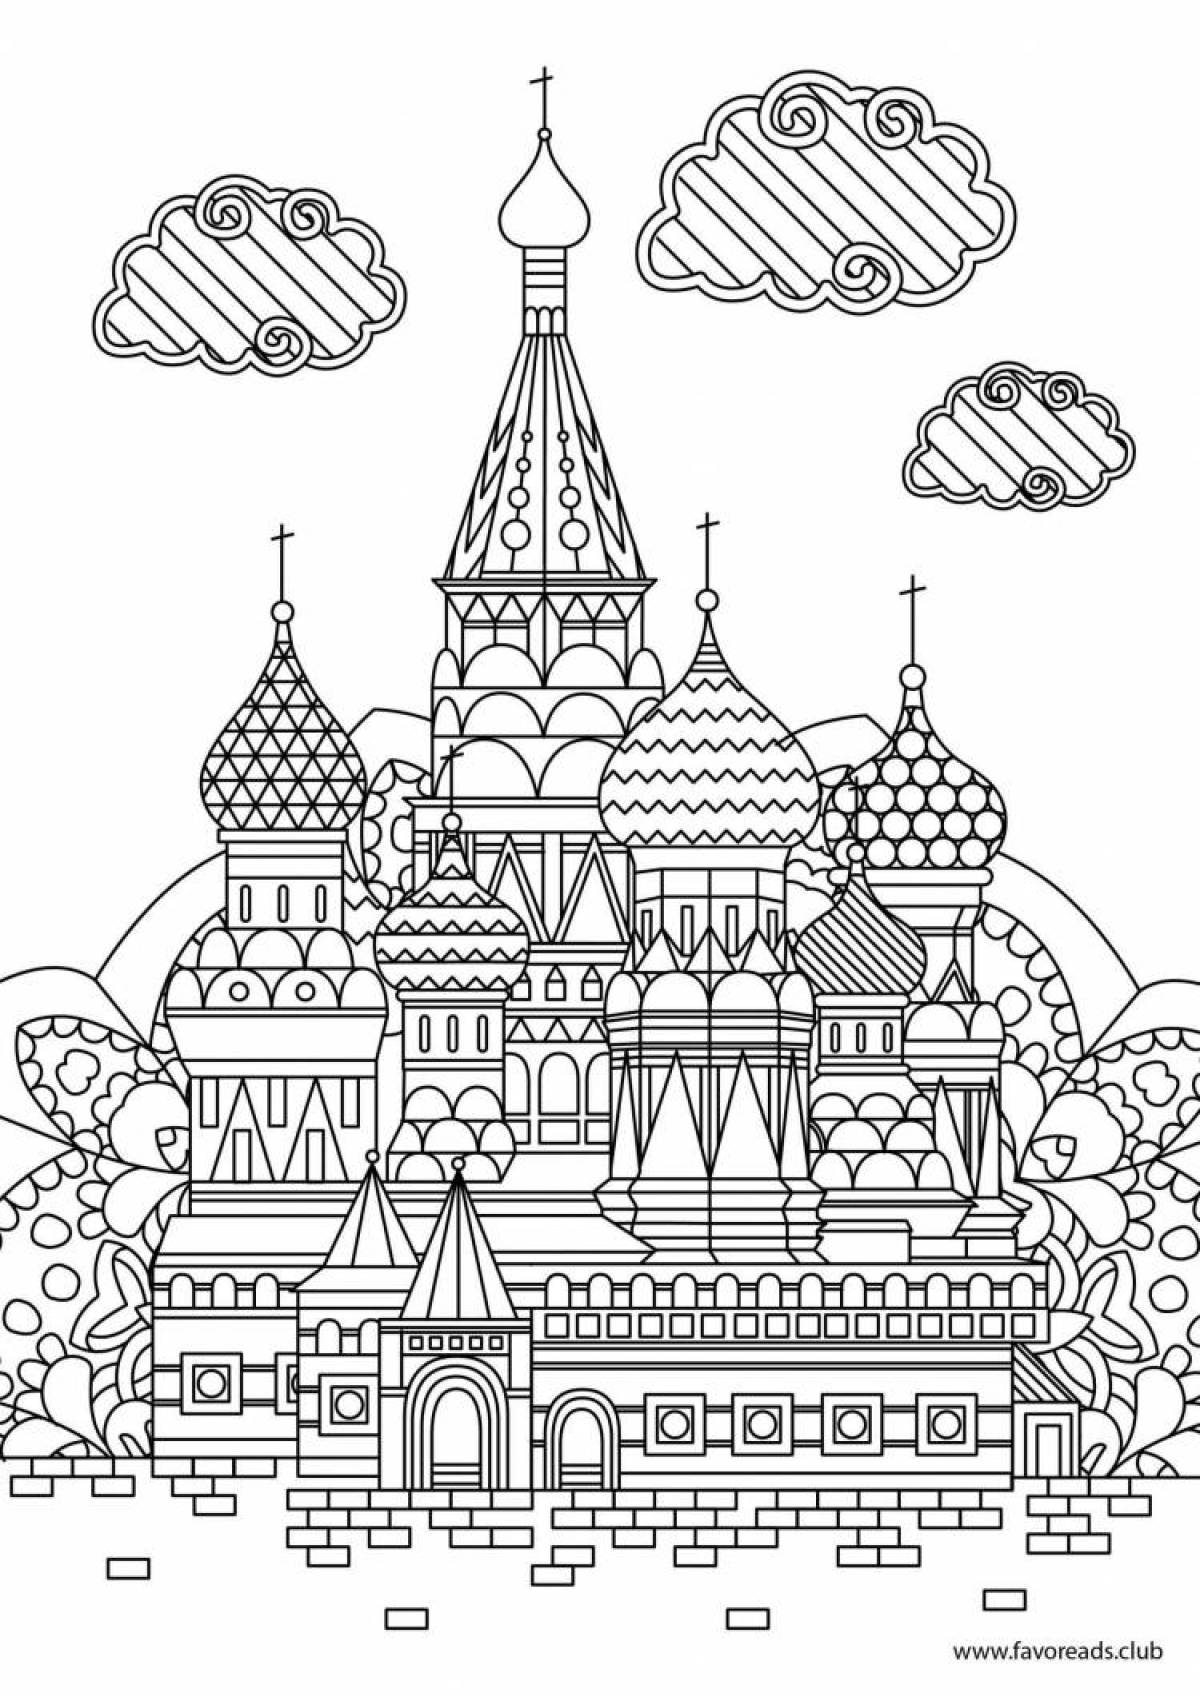 Shiny red square coloring book